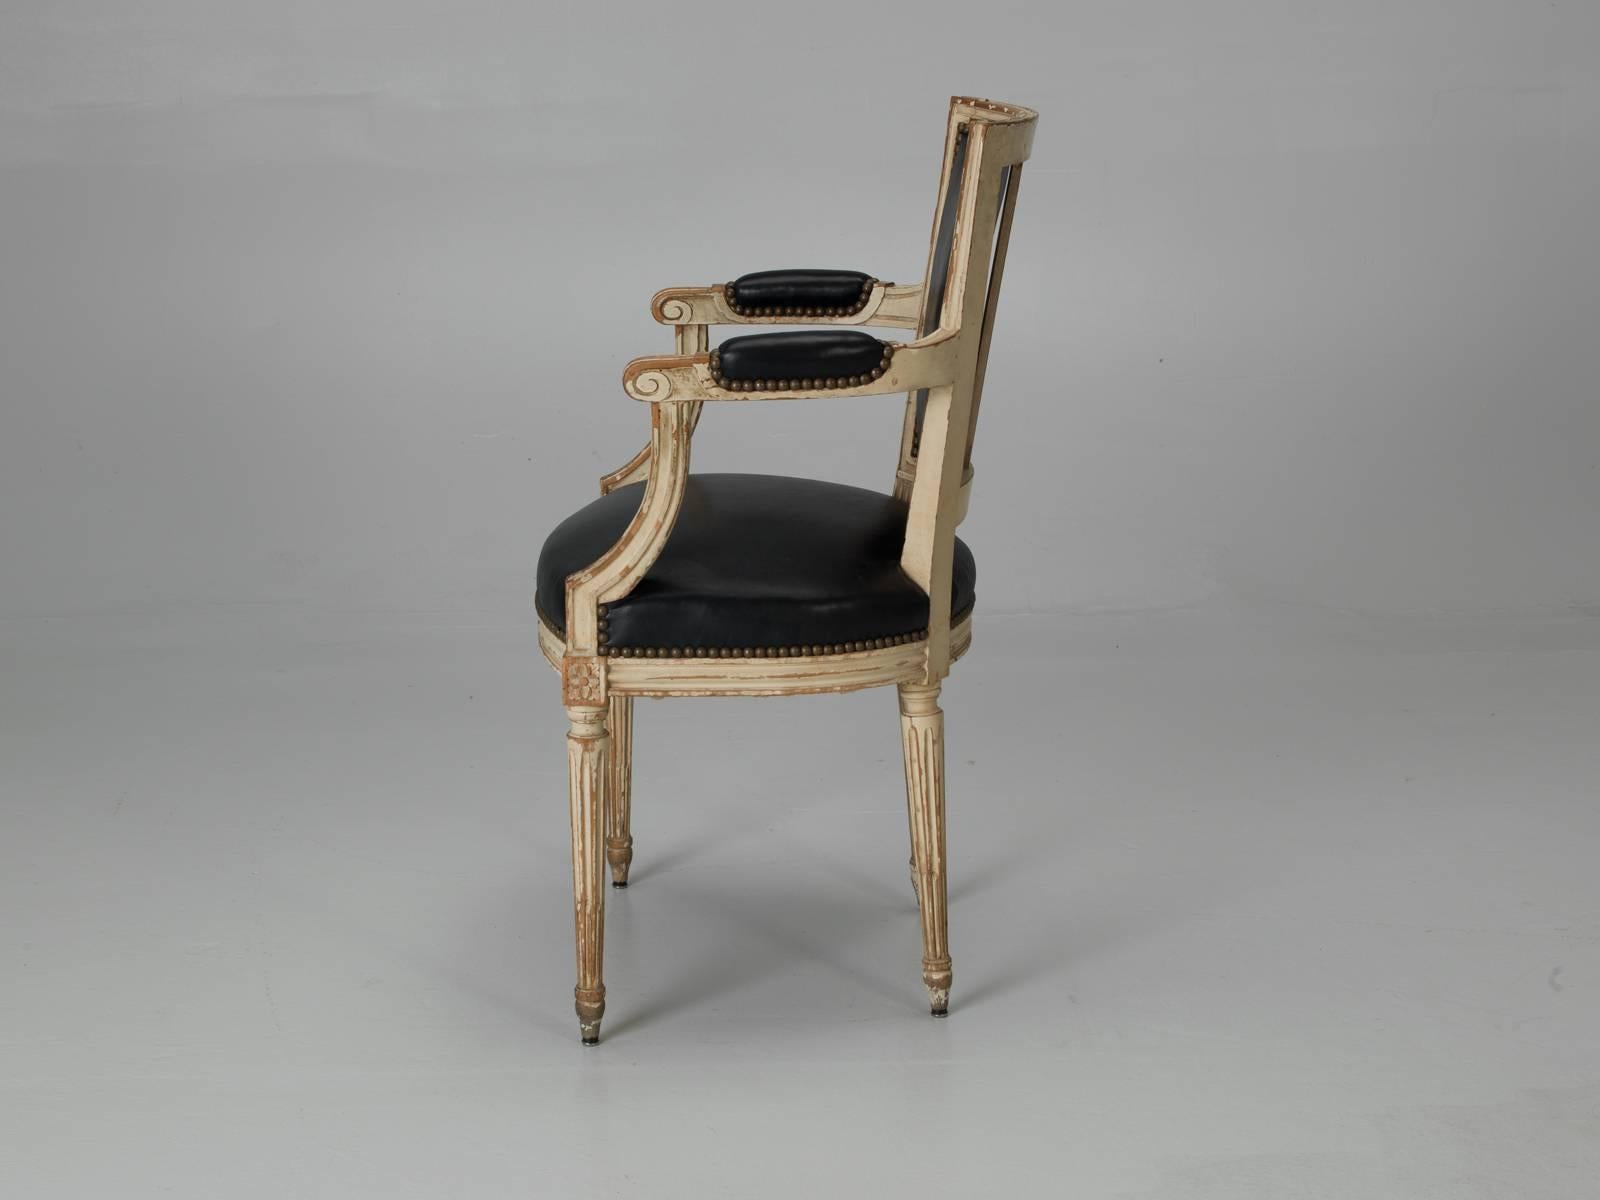 Antique Louis XVI Style French Dining Chairs in Original Paint and Black Leather (Louis XVI.)